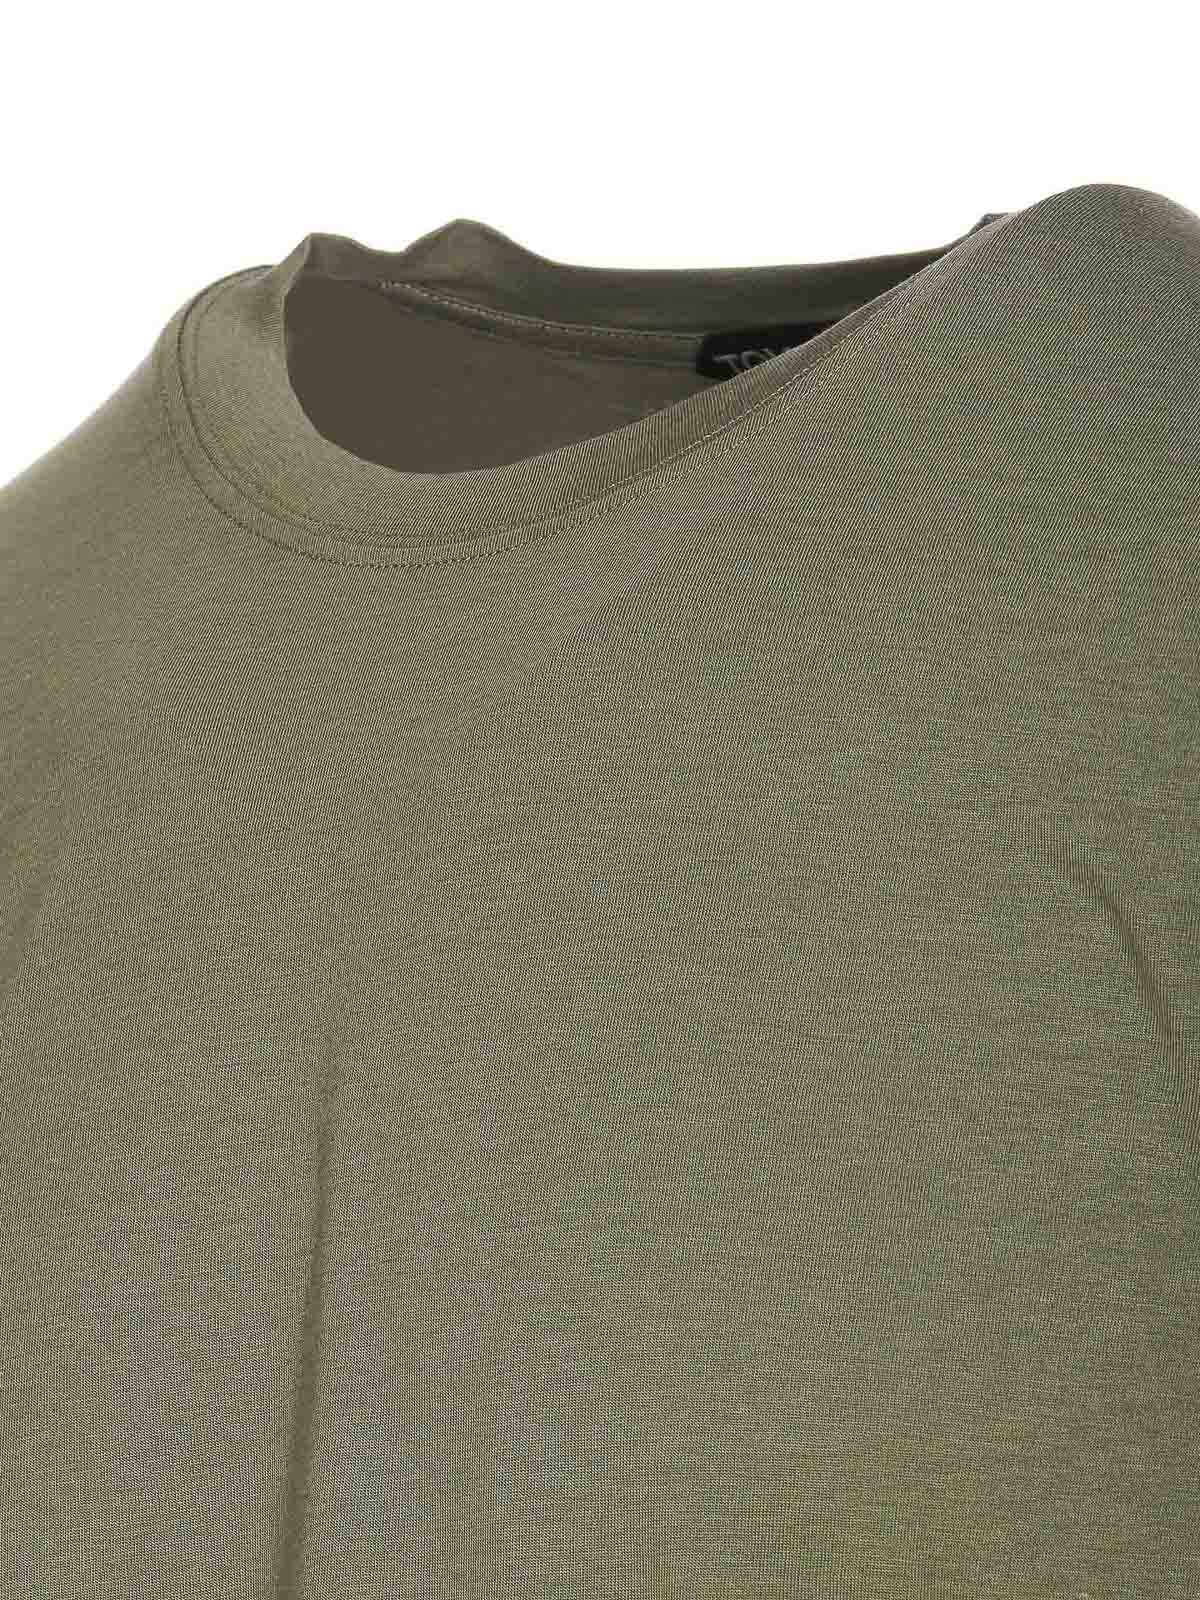 Shop Tom Ford Pale Army Green Tee Crewneck